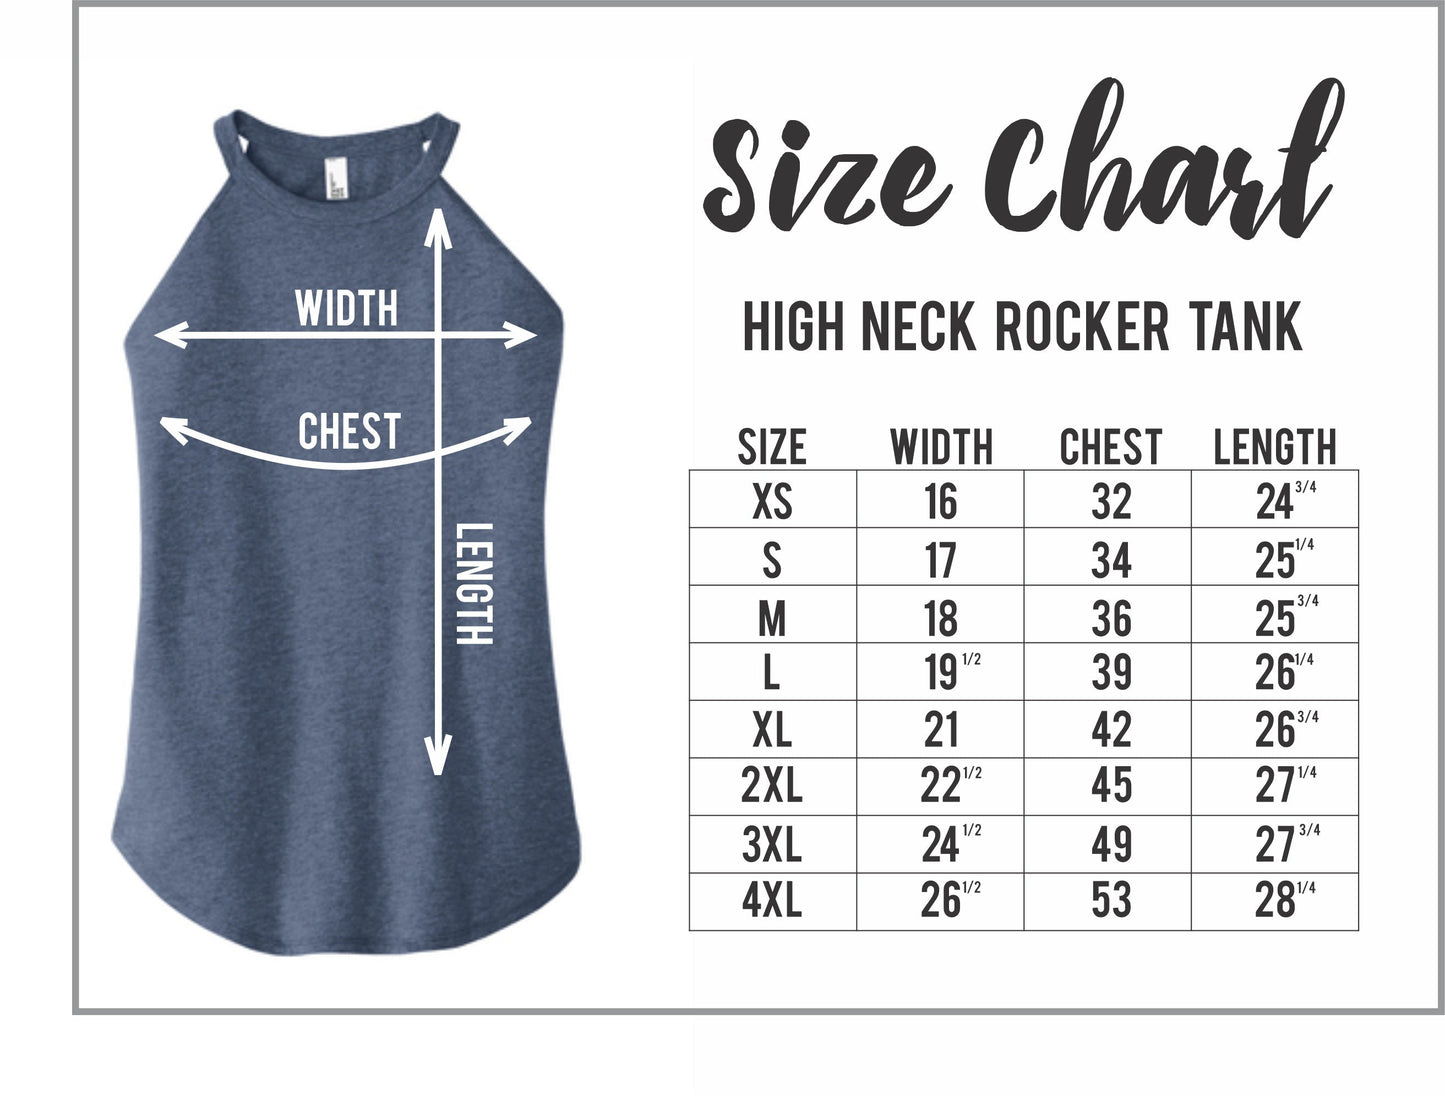 Forget Skinny I'm Training to become a Bad Ass - High Neck Rocker Tank